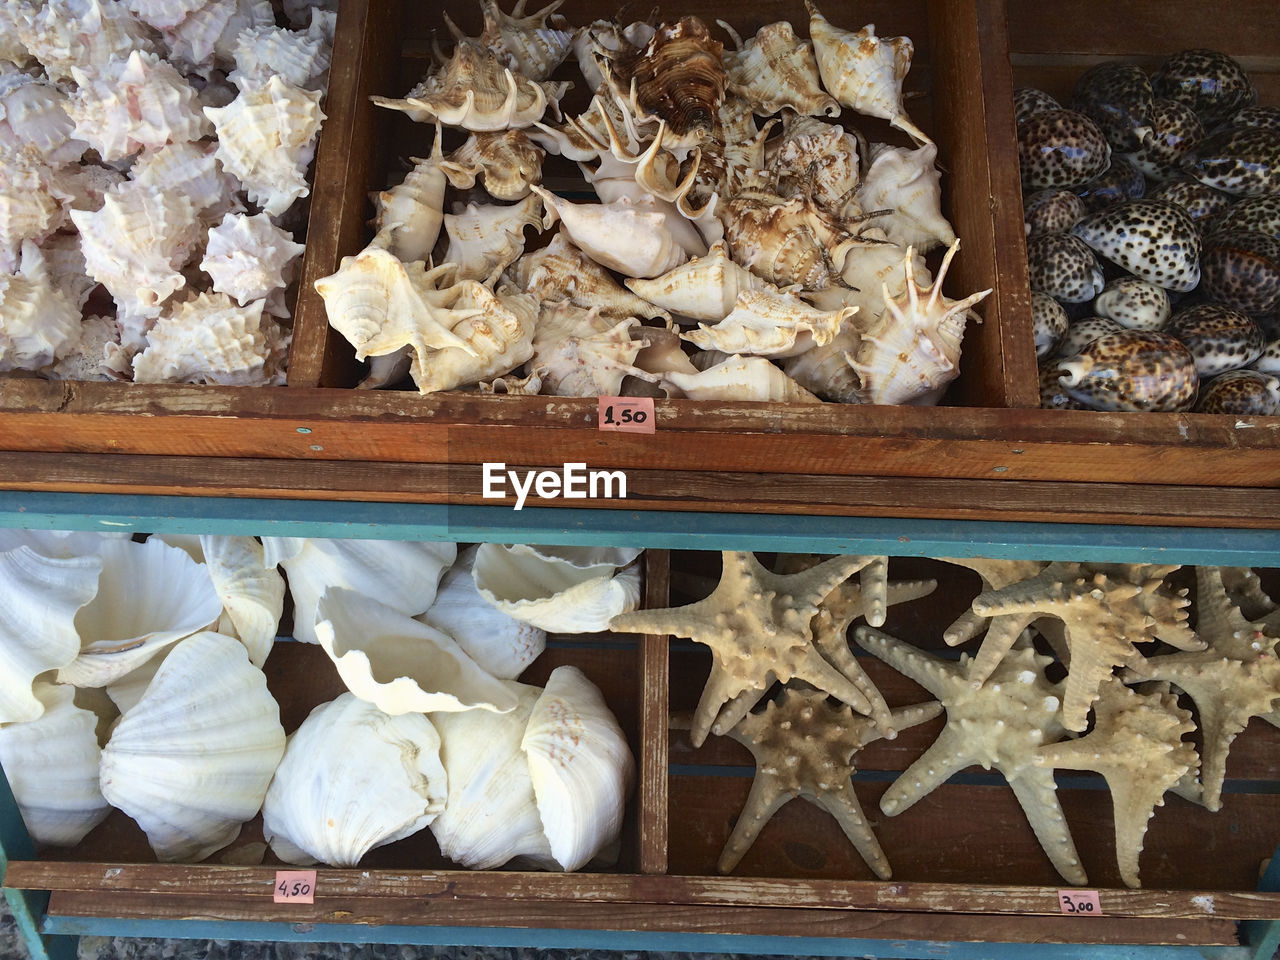 Sea shells displayed in market for sale